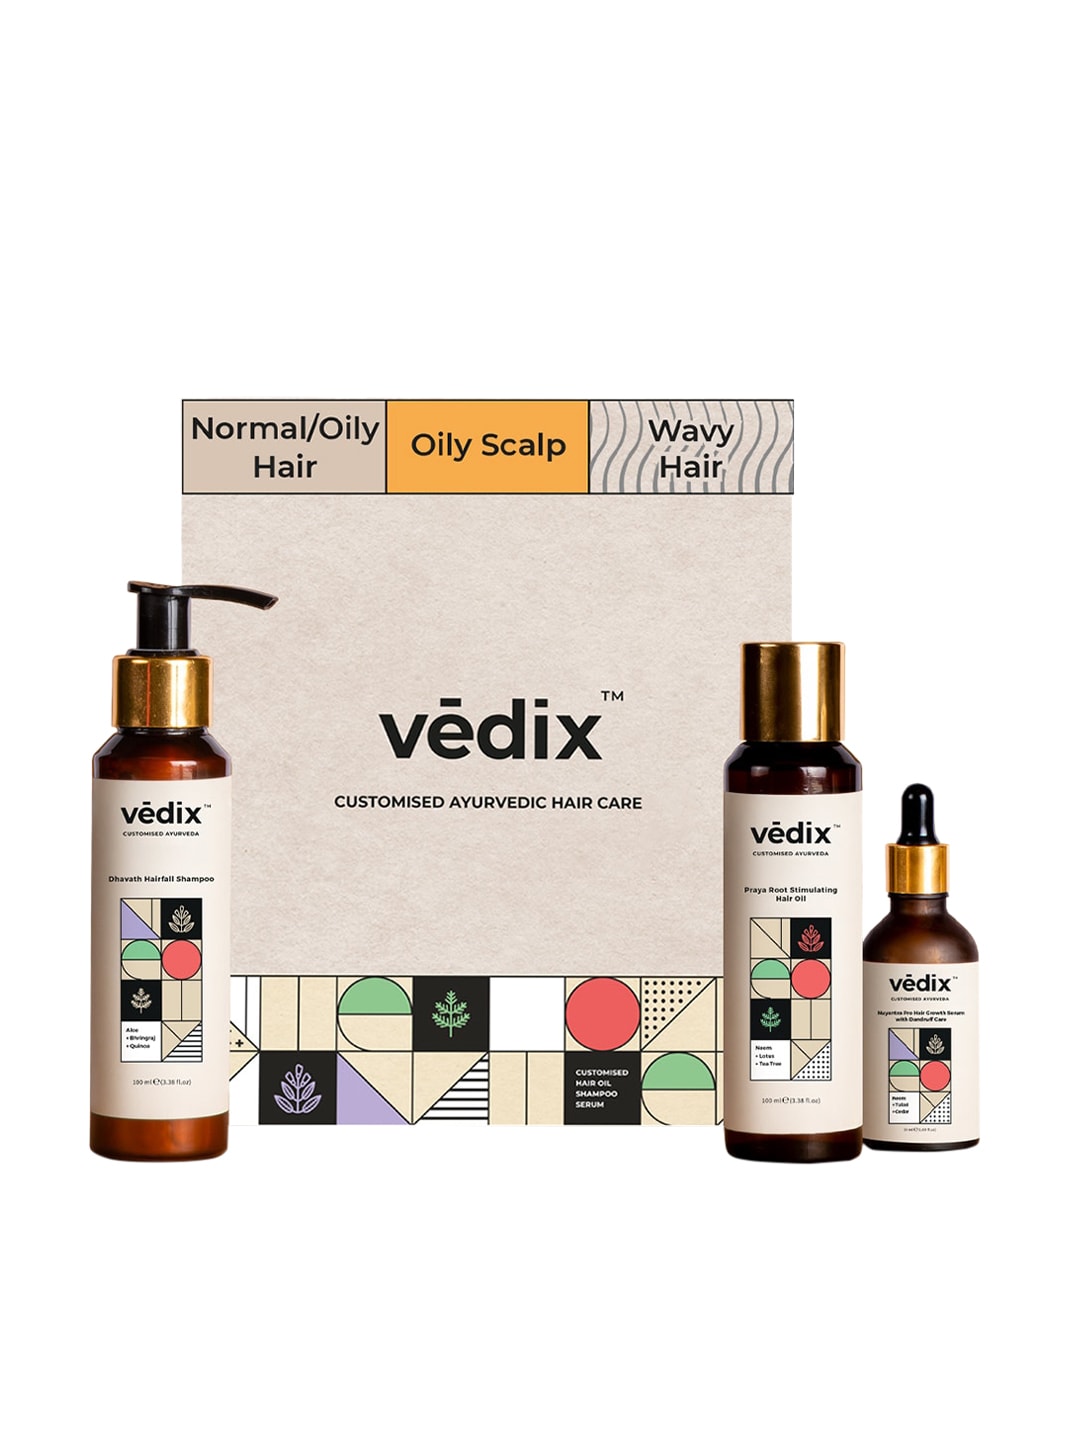 VEDIX Womens Customized Hair fall Control Regimen Kit for Oily Scalp + Wavy Hair - 540 gm Price in India